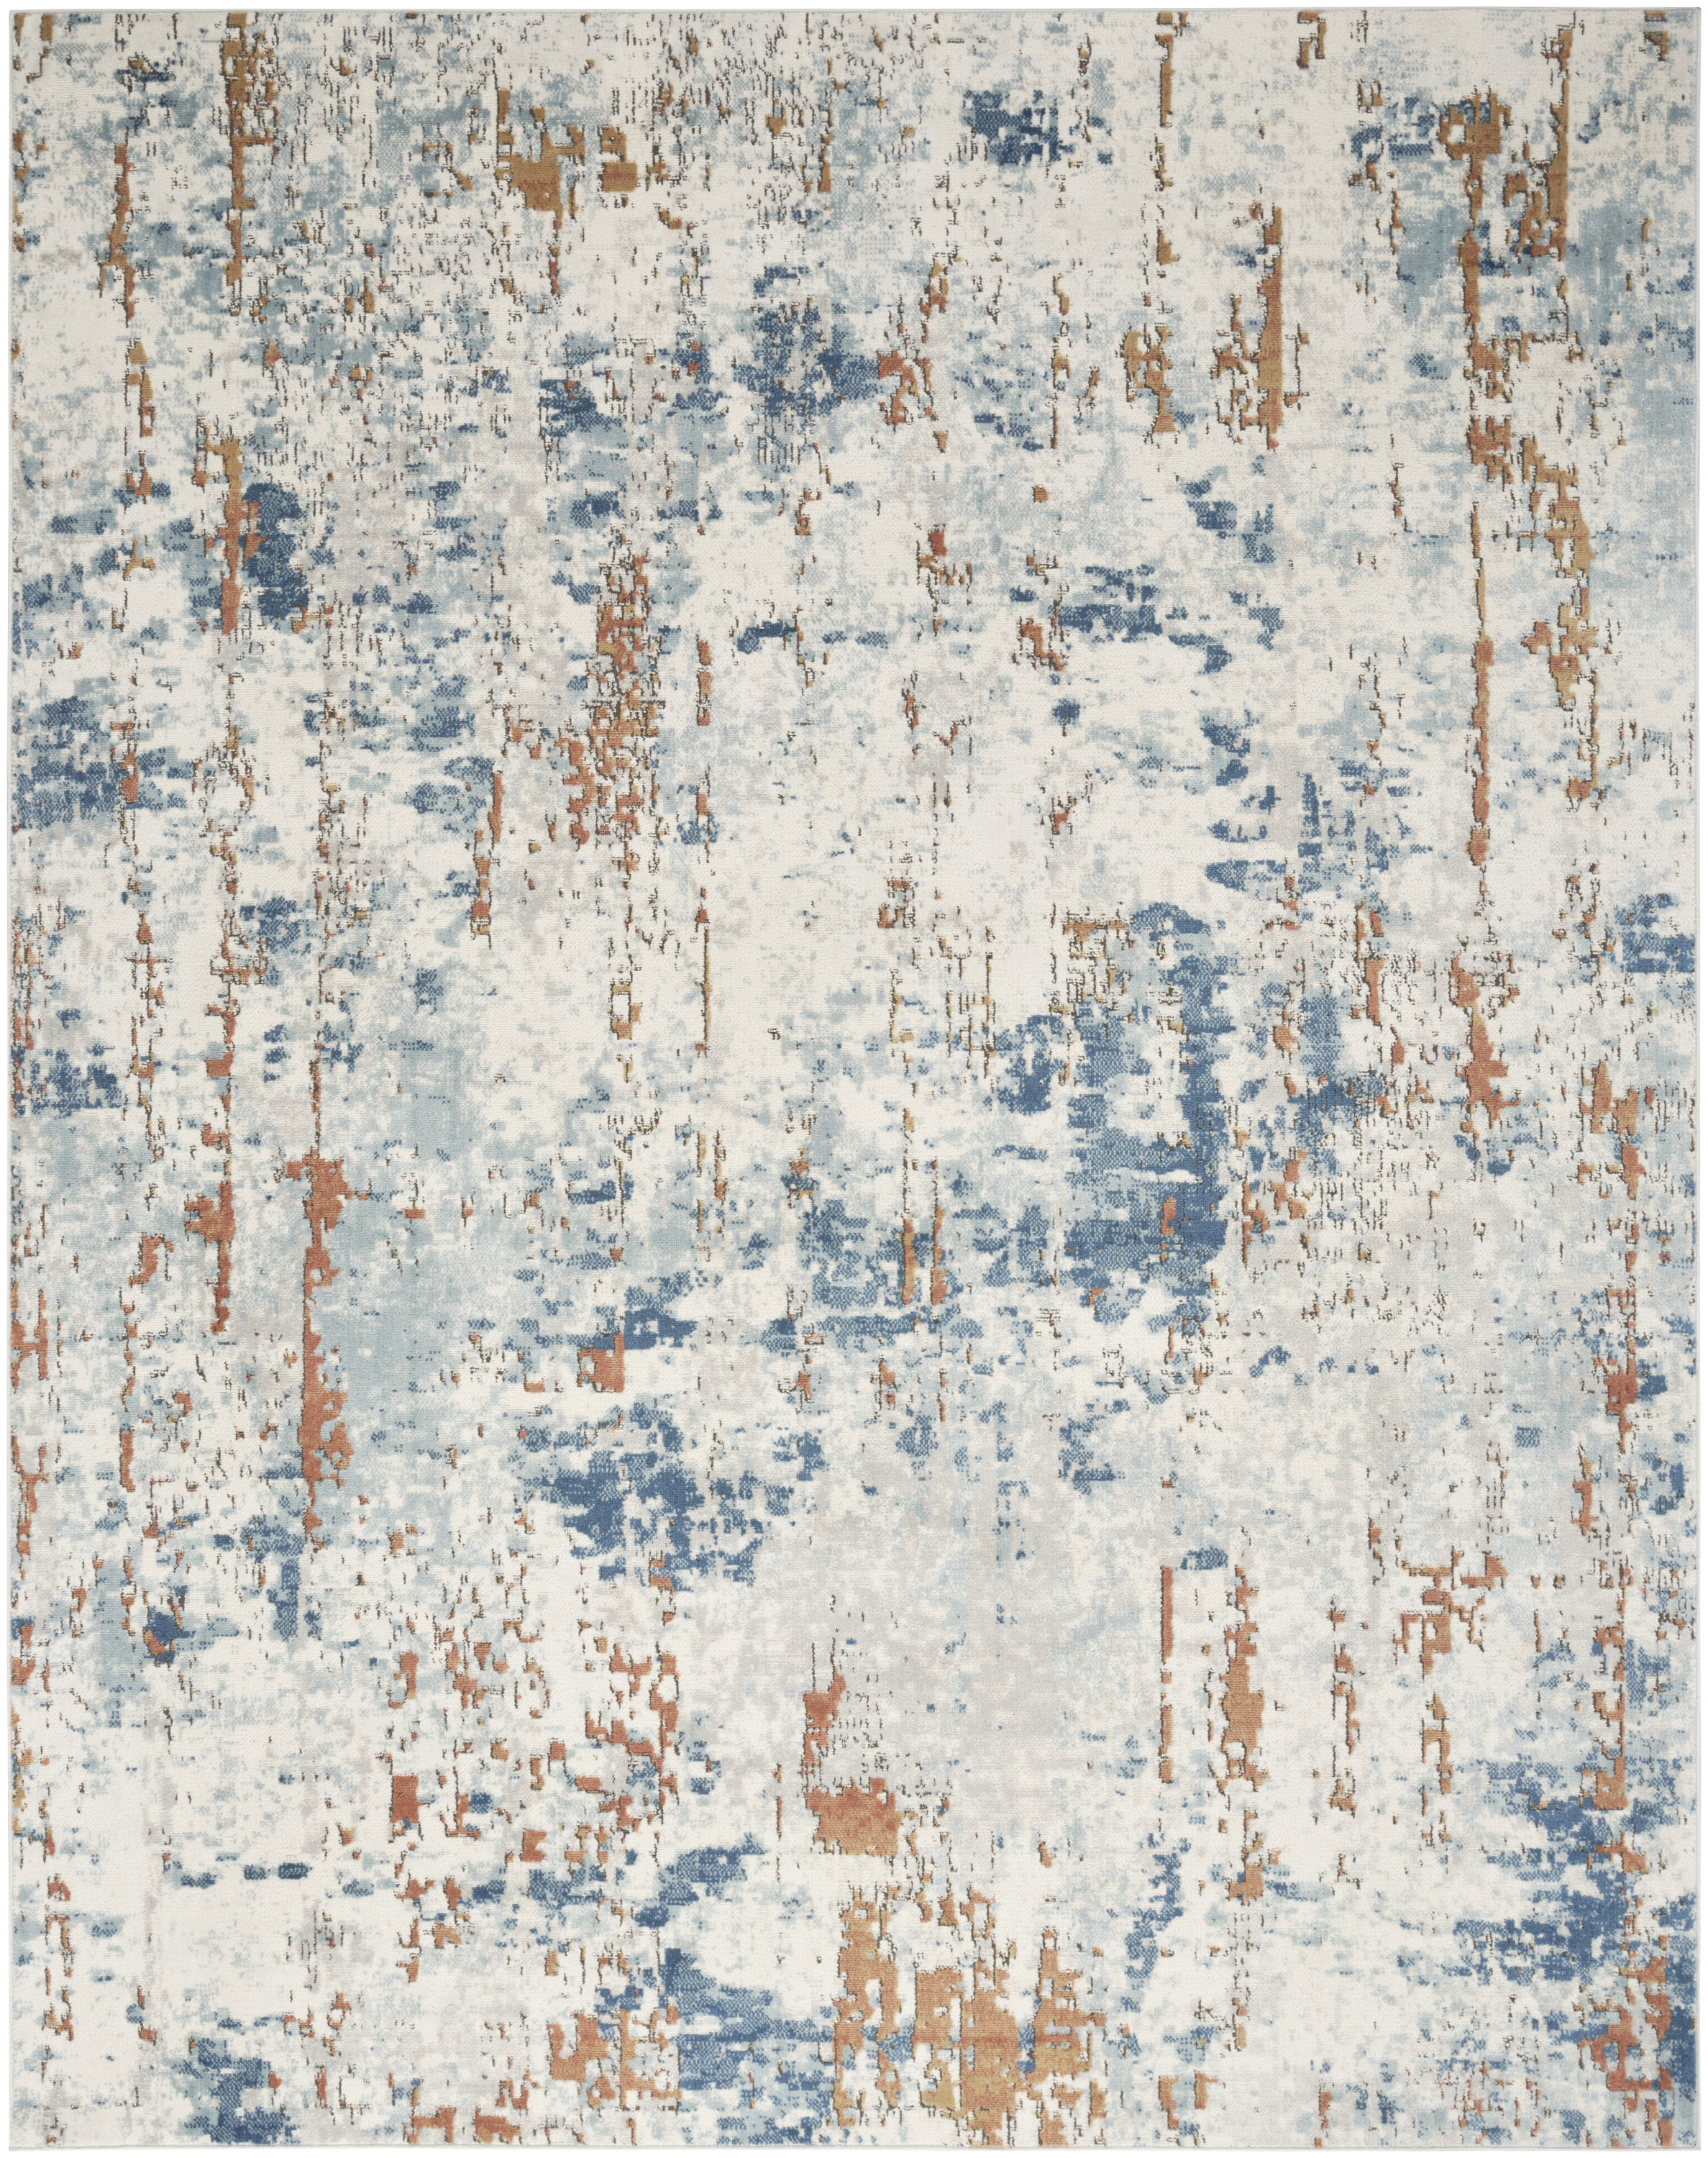 Nourison Concerto Abstract Beige Blue Rust 5'3" x 7'3" Area Rug, (5x7) - image 2 of 8